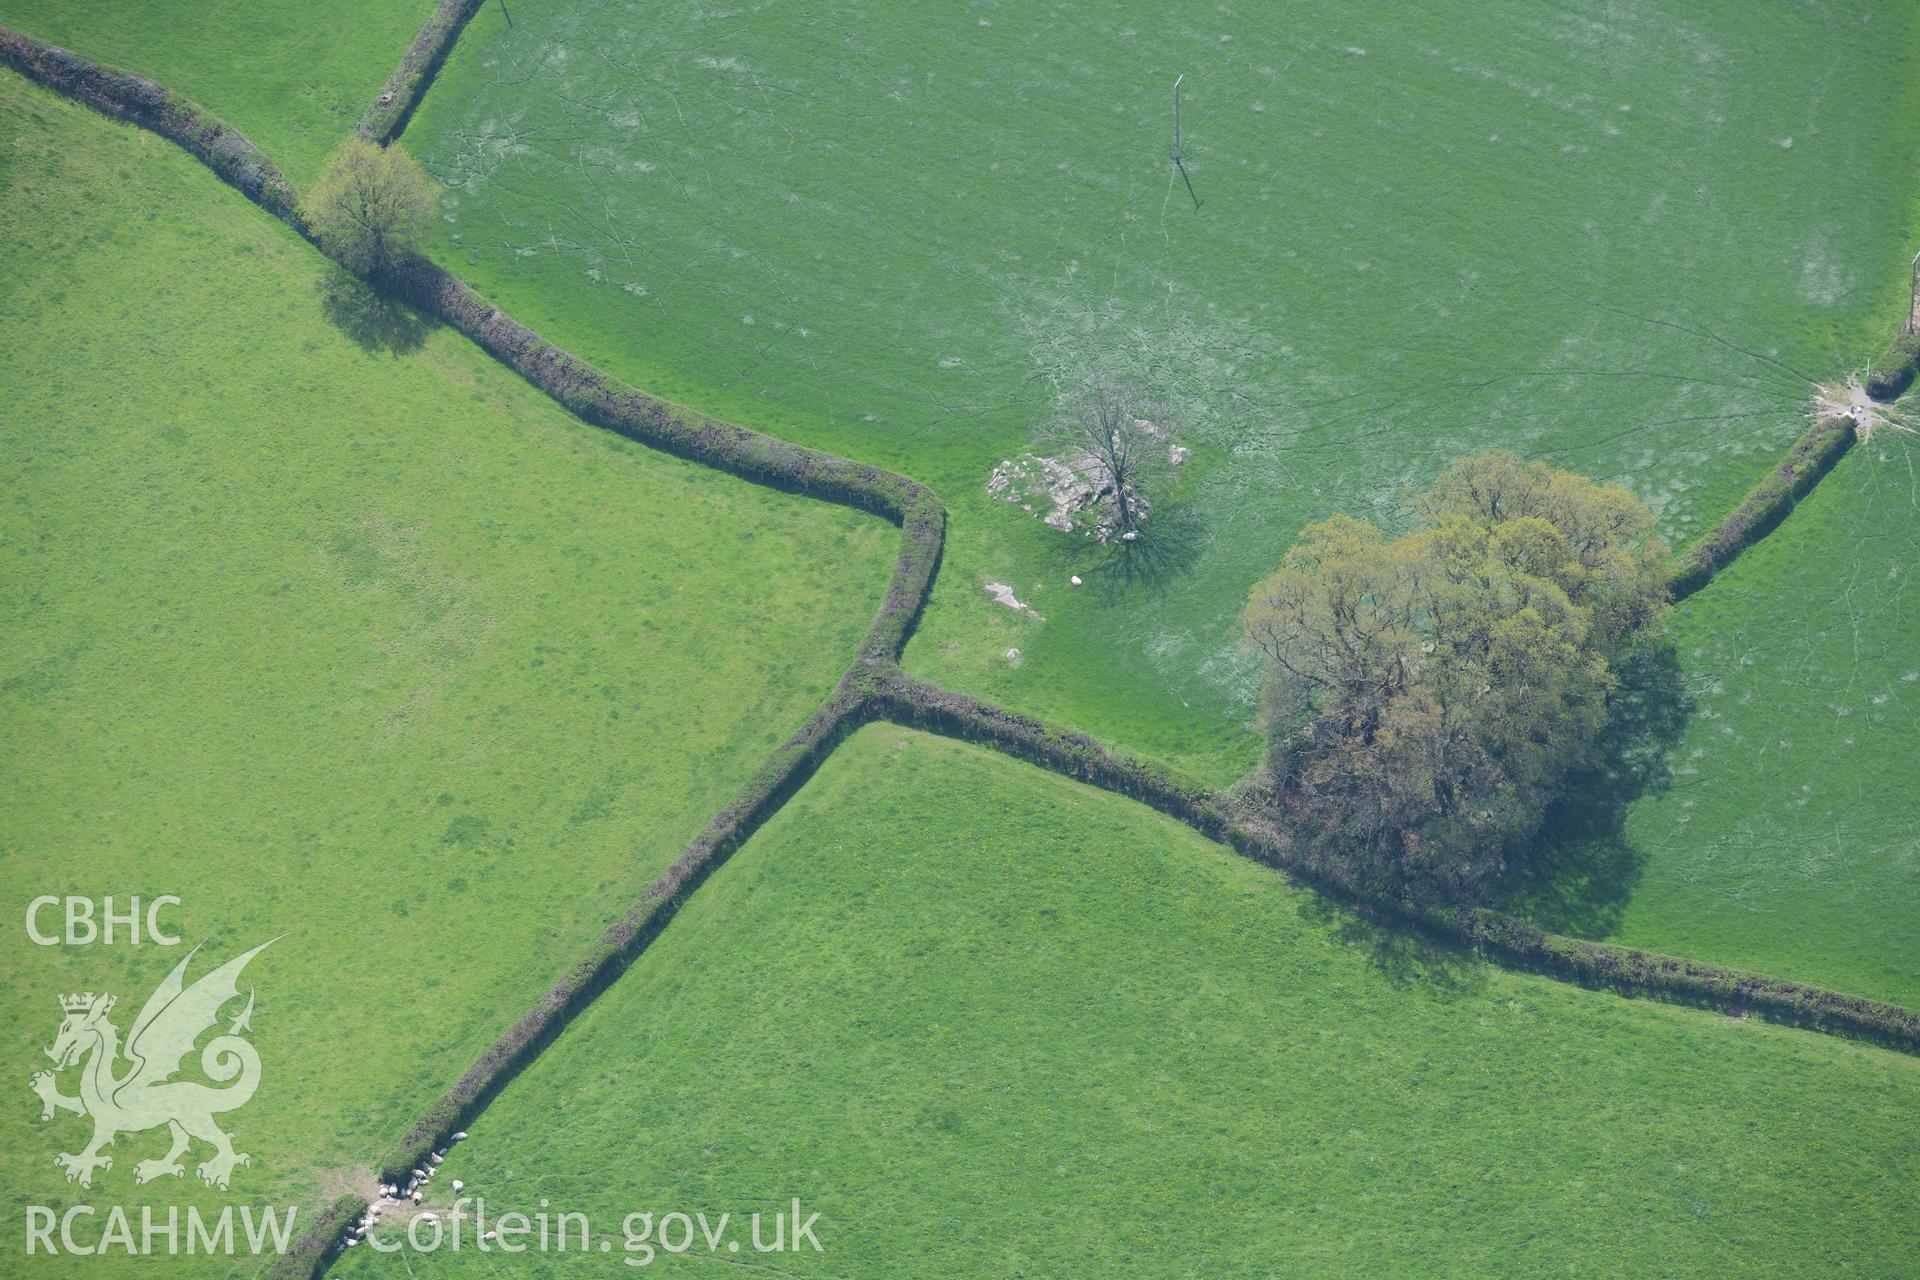 Llys Brychan Roman villa; detail of outcrop to the east of the villa. Oblique aerial photograph taken during the Royal Commission's programme of archaeological aerial reconnaissance by Toby Driver on 29 April 2022.